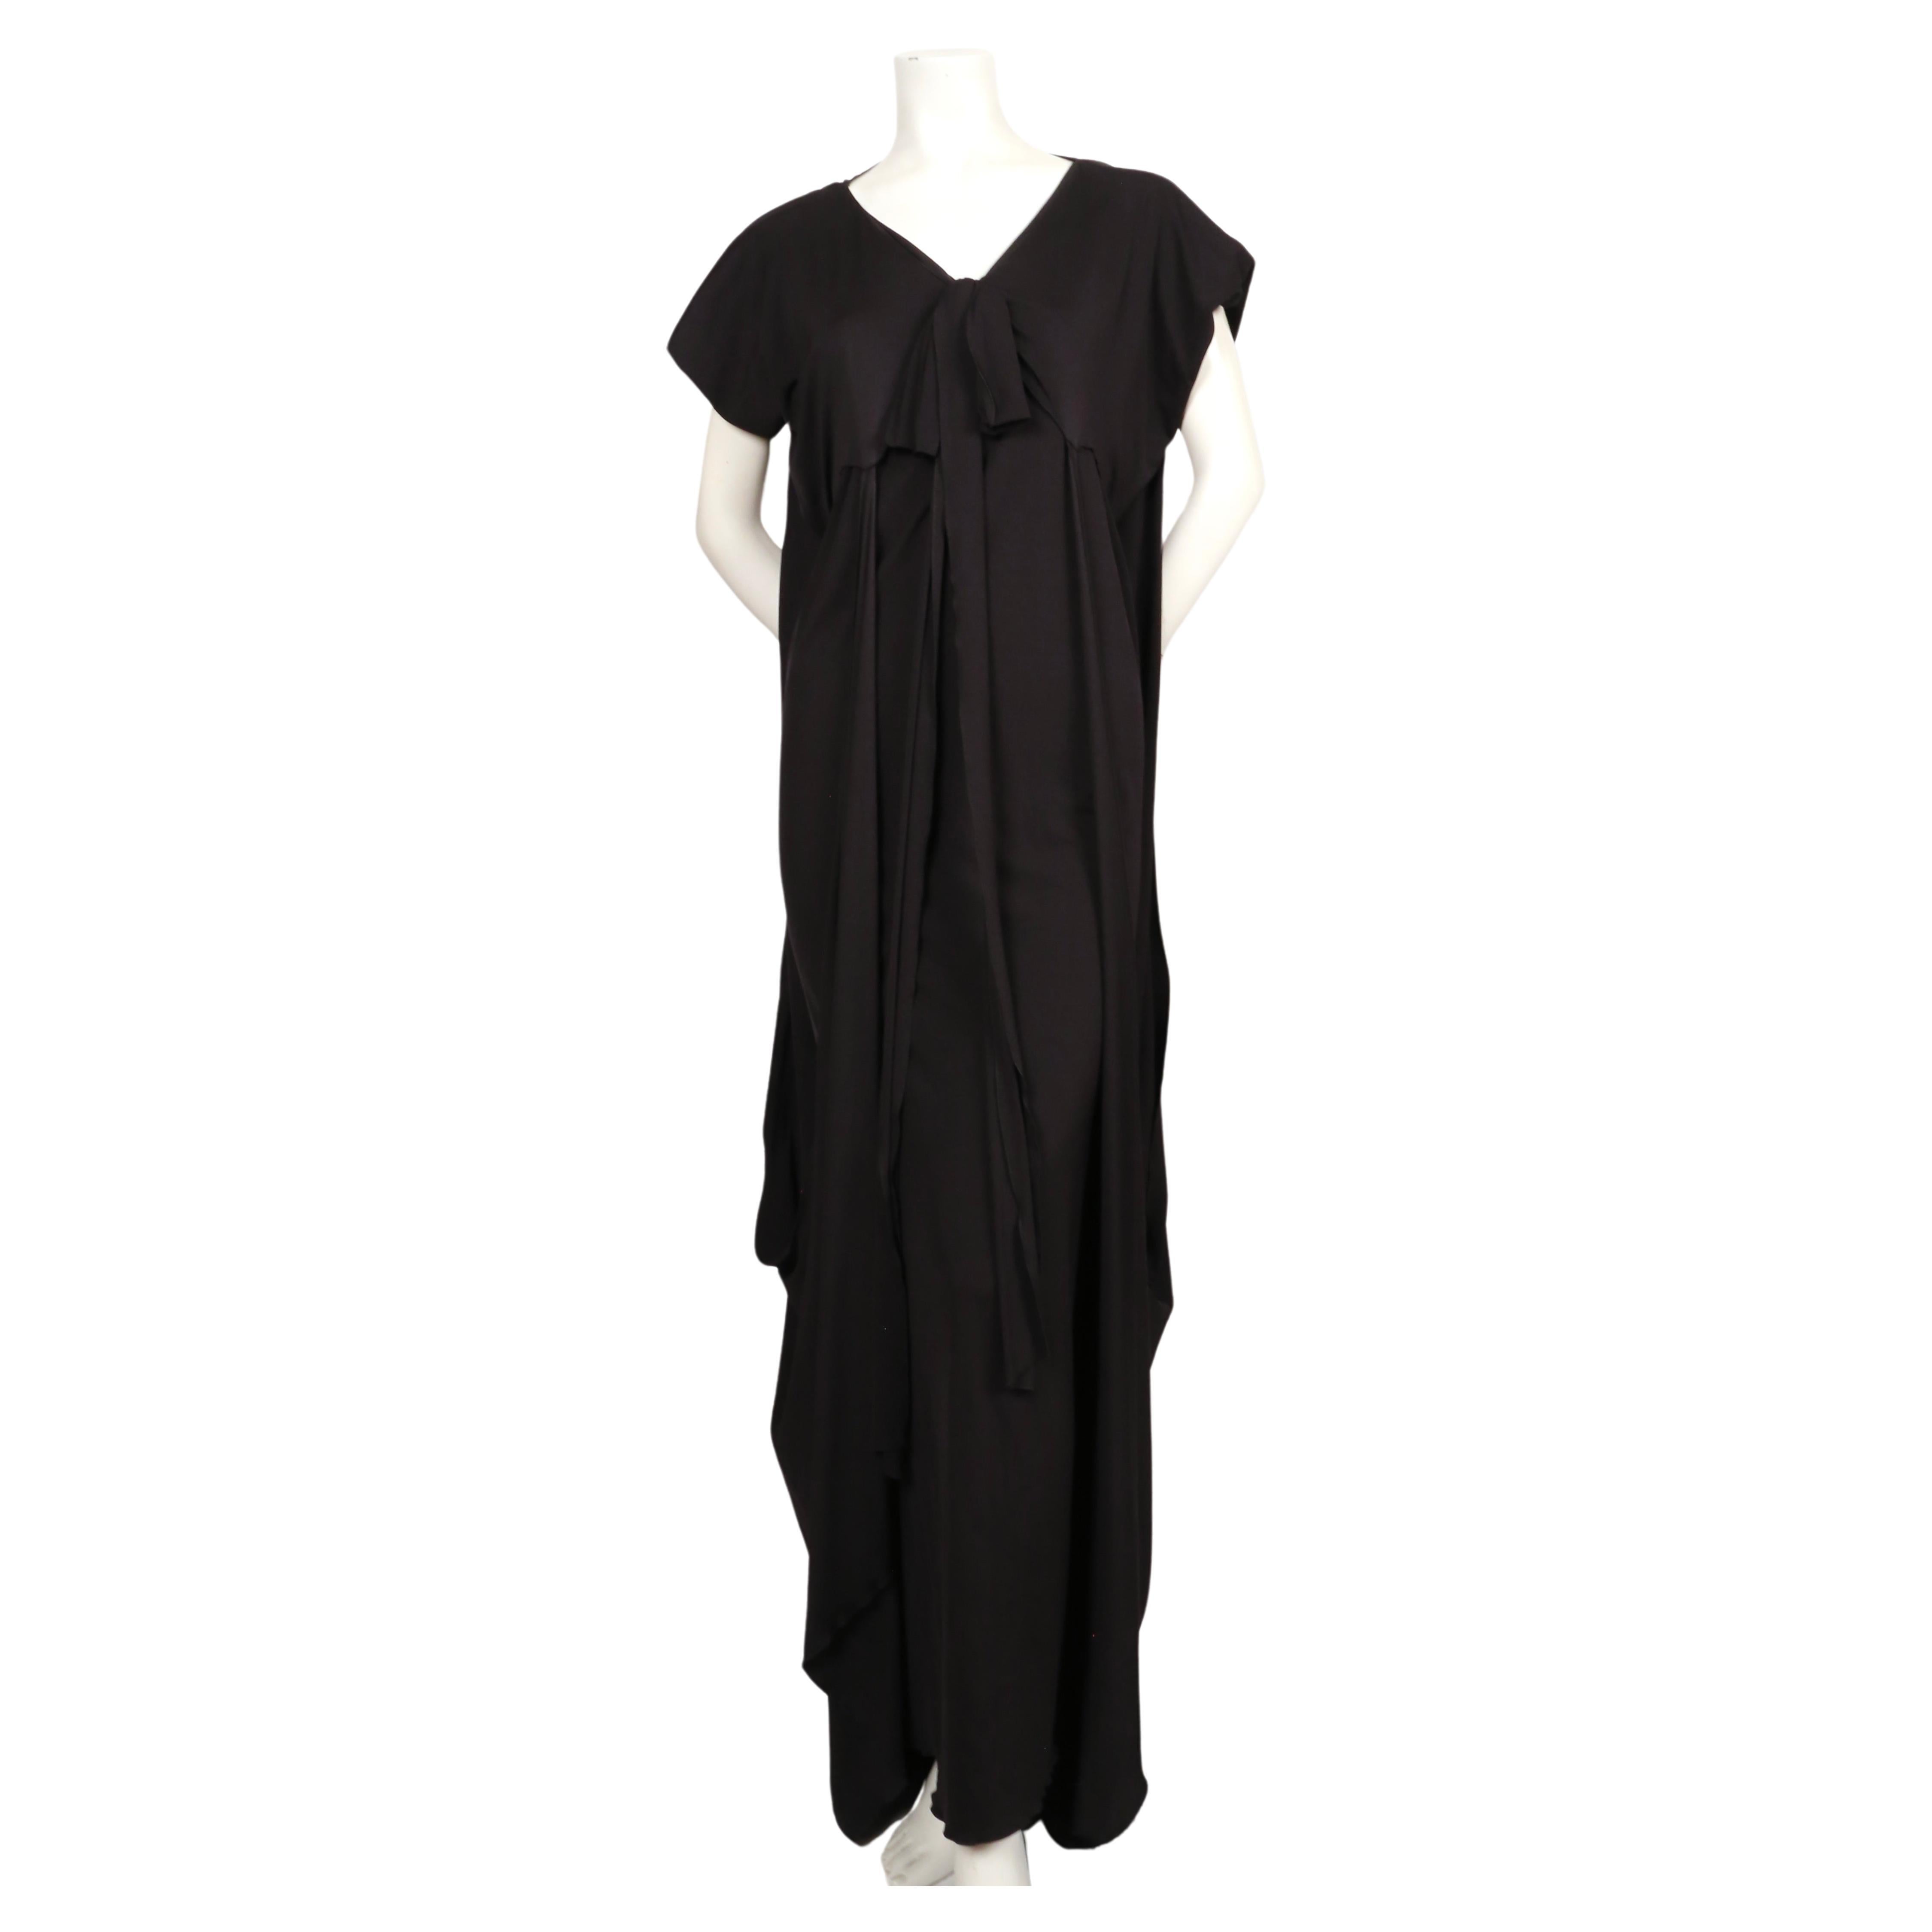 Dramatic, jet black caftan dress with draped sides at designed by Stefano Pilati for Yves Saint Laurent dating to spring of 2009' Labeled a French size XXS although this dress is very stretchy 40. Dress measures approximately: 34